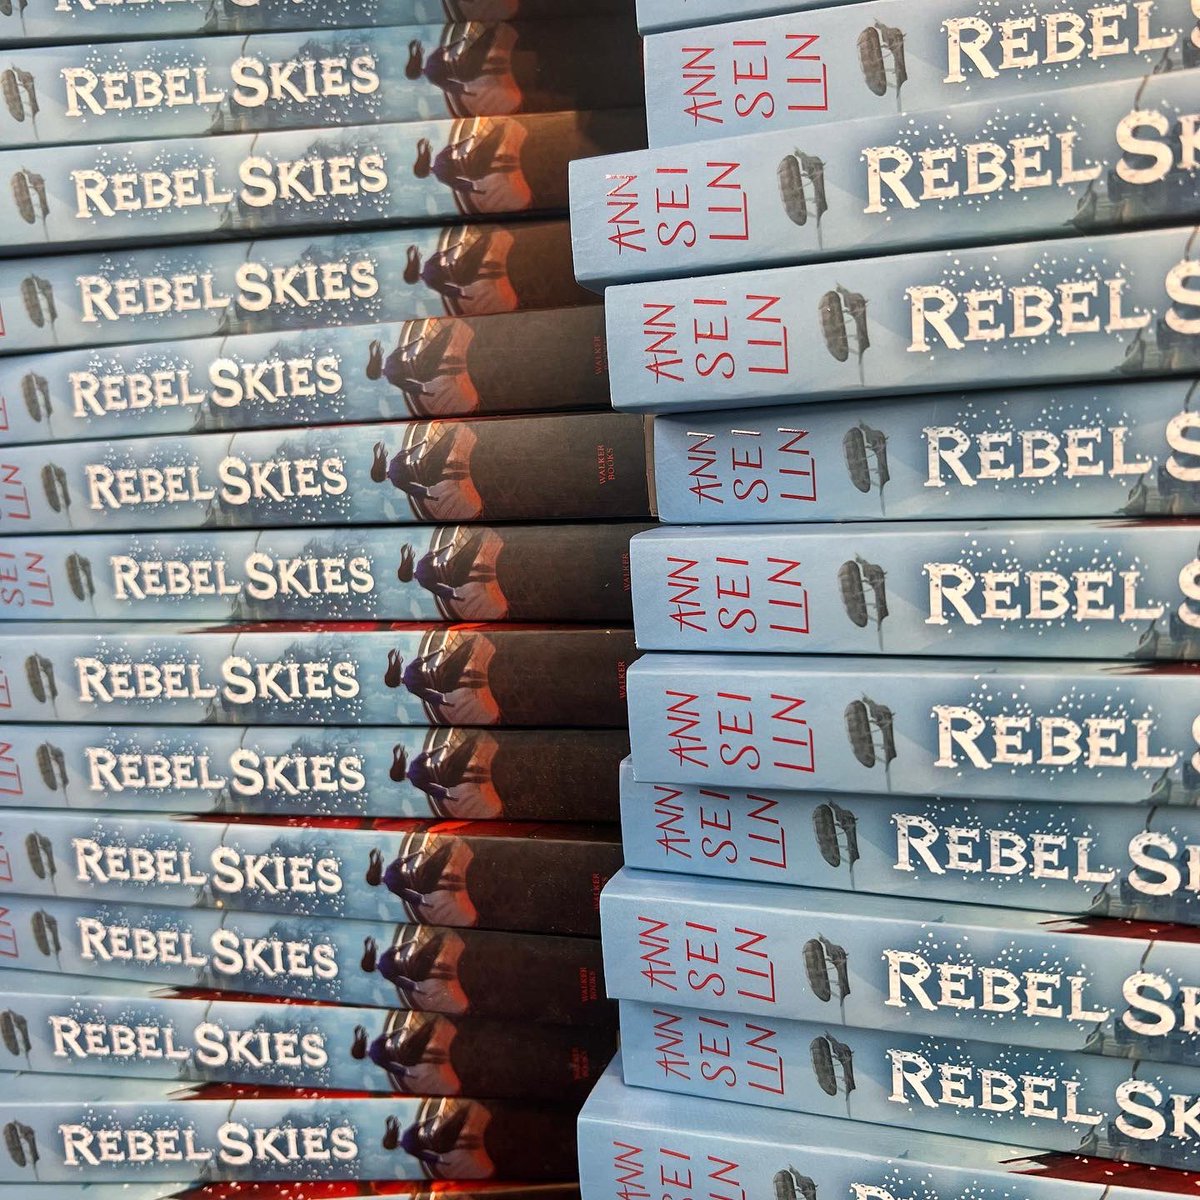 Can you believe the amount of copies of #RebelSkies got sent out for Mays box! 
When I initially had this idea I had no idea how popular it would be! So thank you for all your support of #UKYA 🧡
@AnnSeiLin1 @WalkerBooksYA